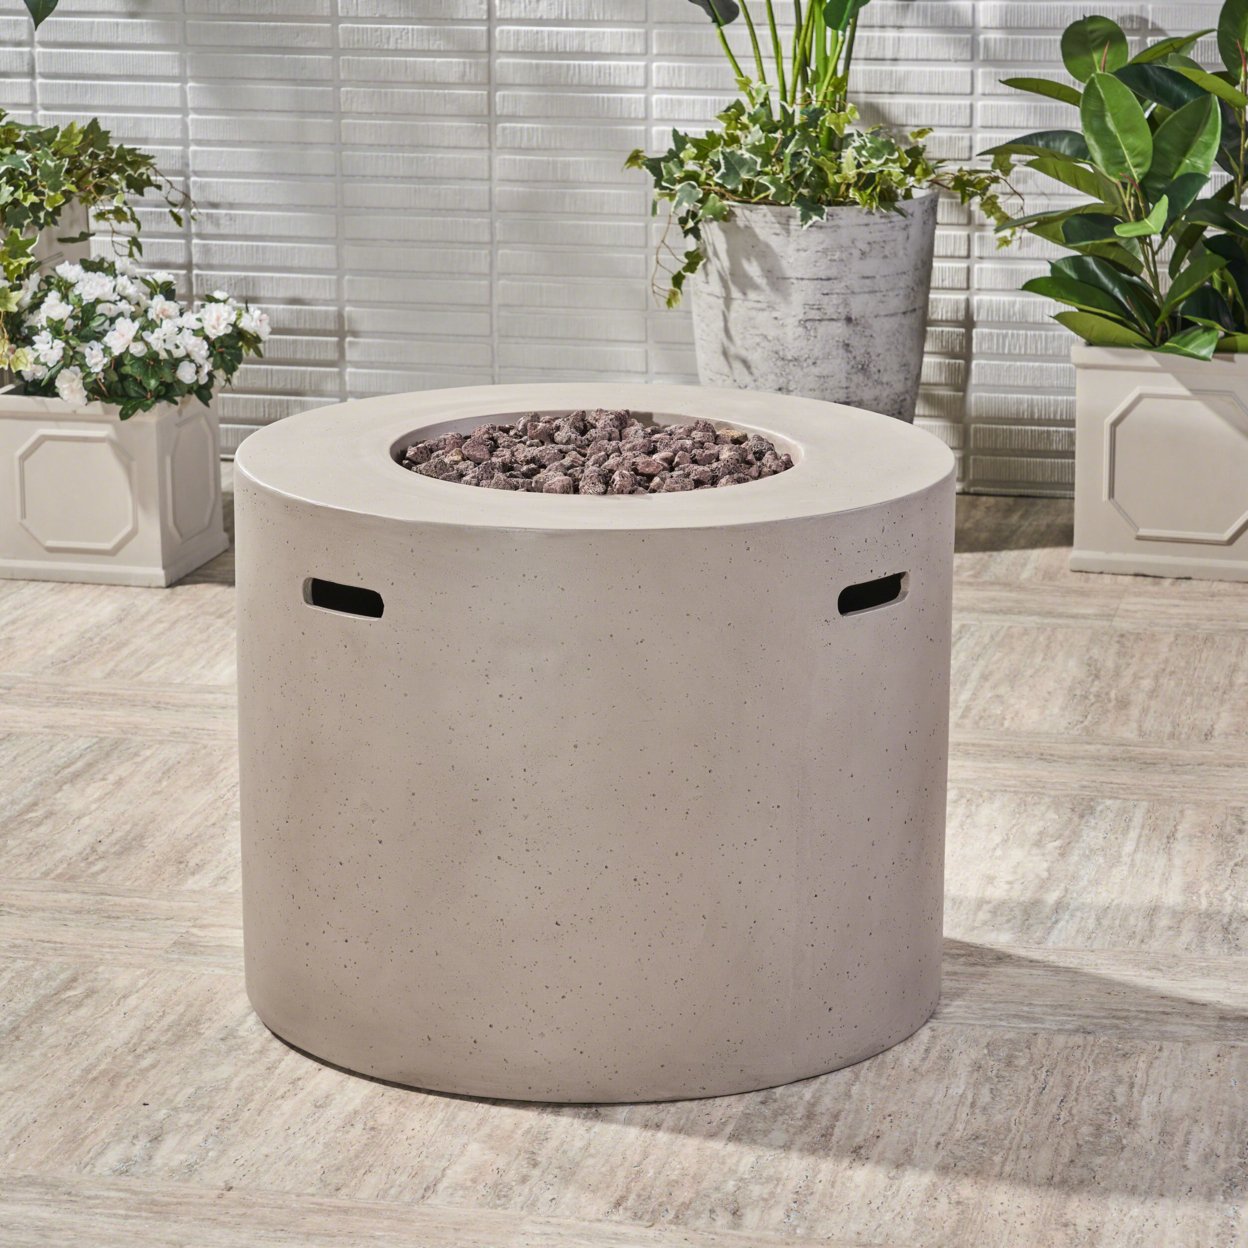 Leo Outdoor 31-inch Round Light Weight Concrete Gas Burning Fire Pit - Light Gray